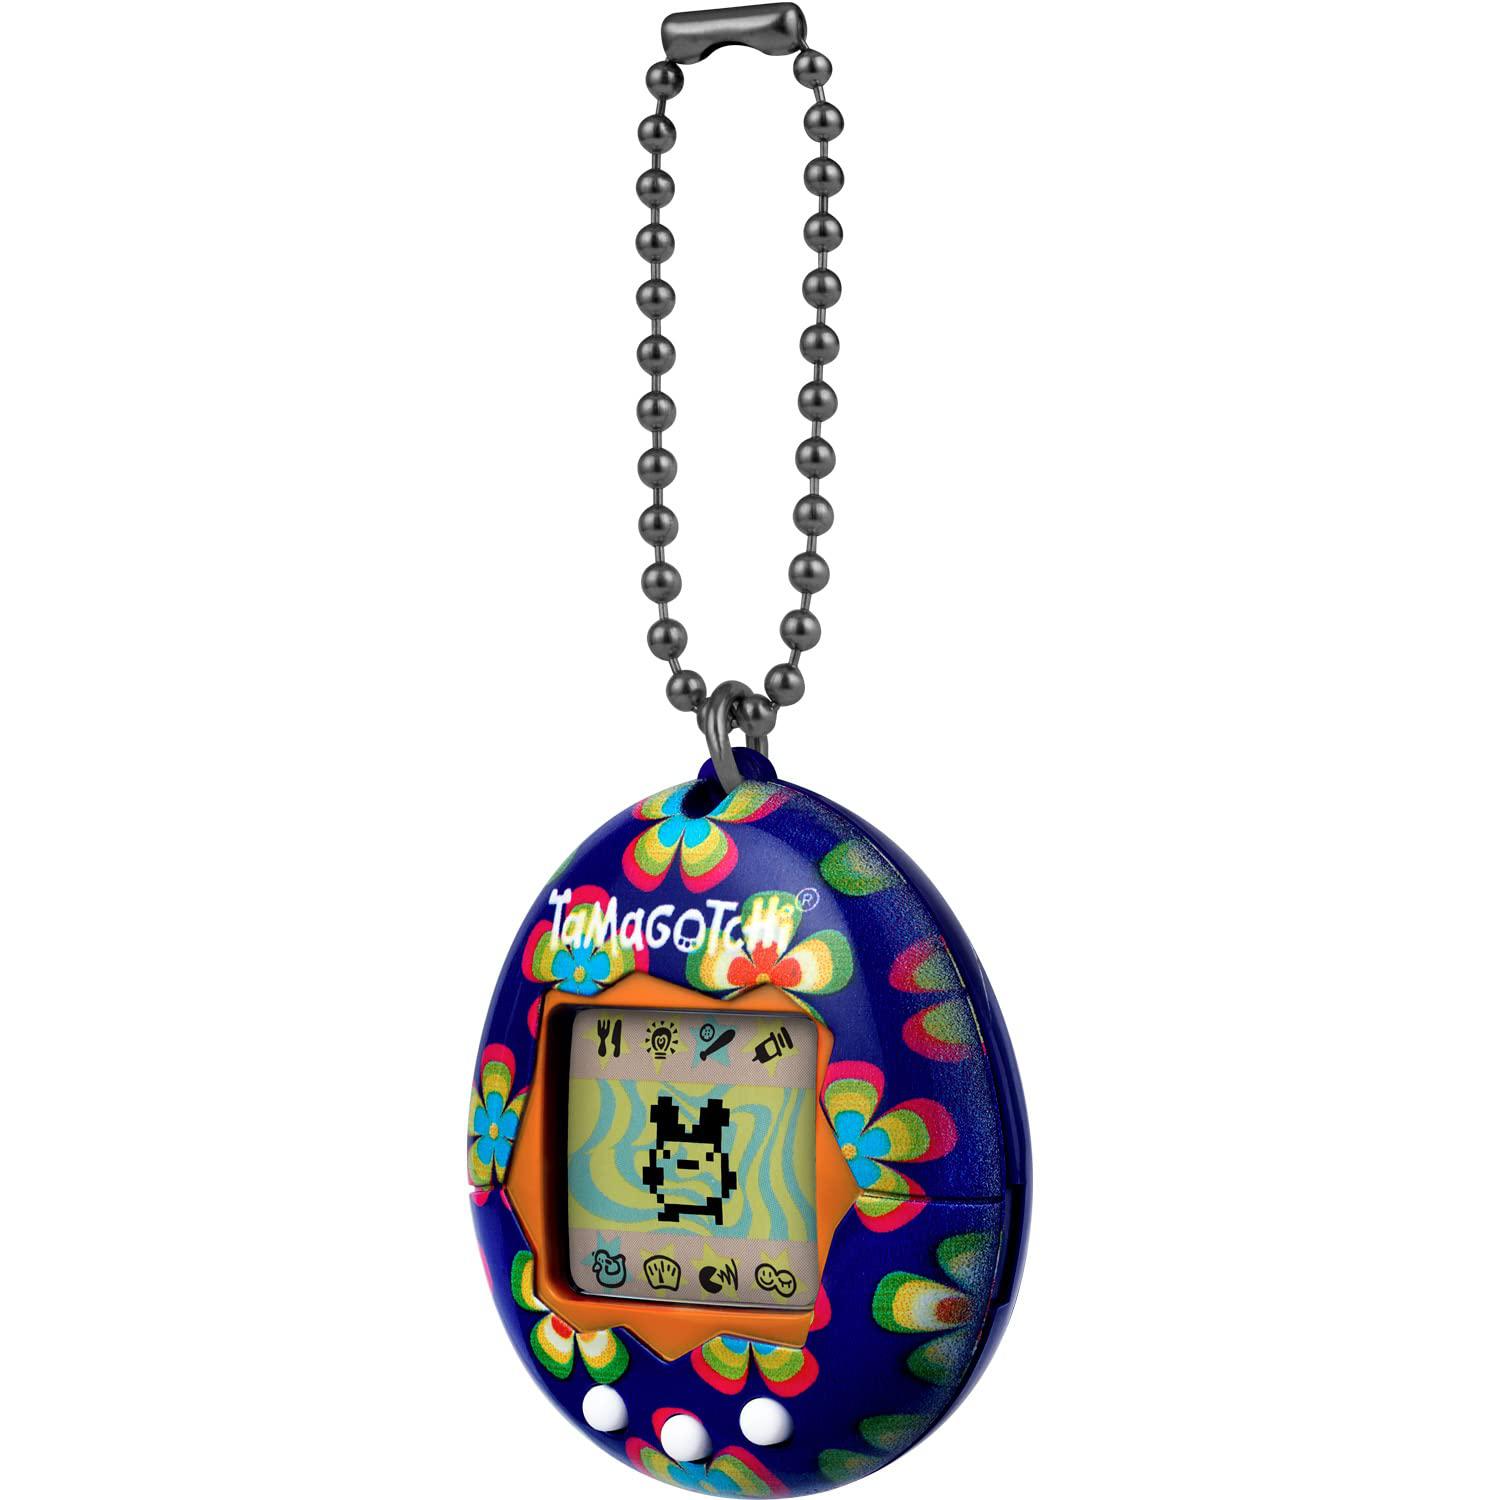 tamagotchi 42888nbnp original retro flowers - feed, care, nurture - virtual pet with chain for on the go play